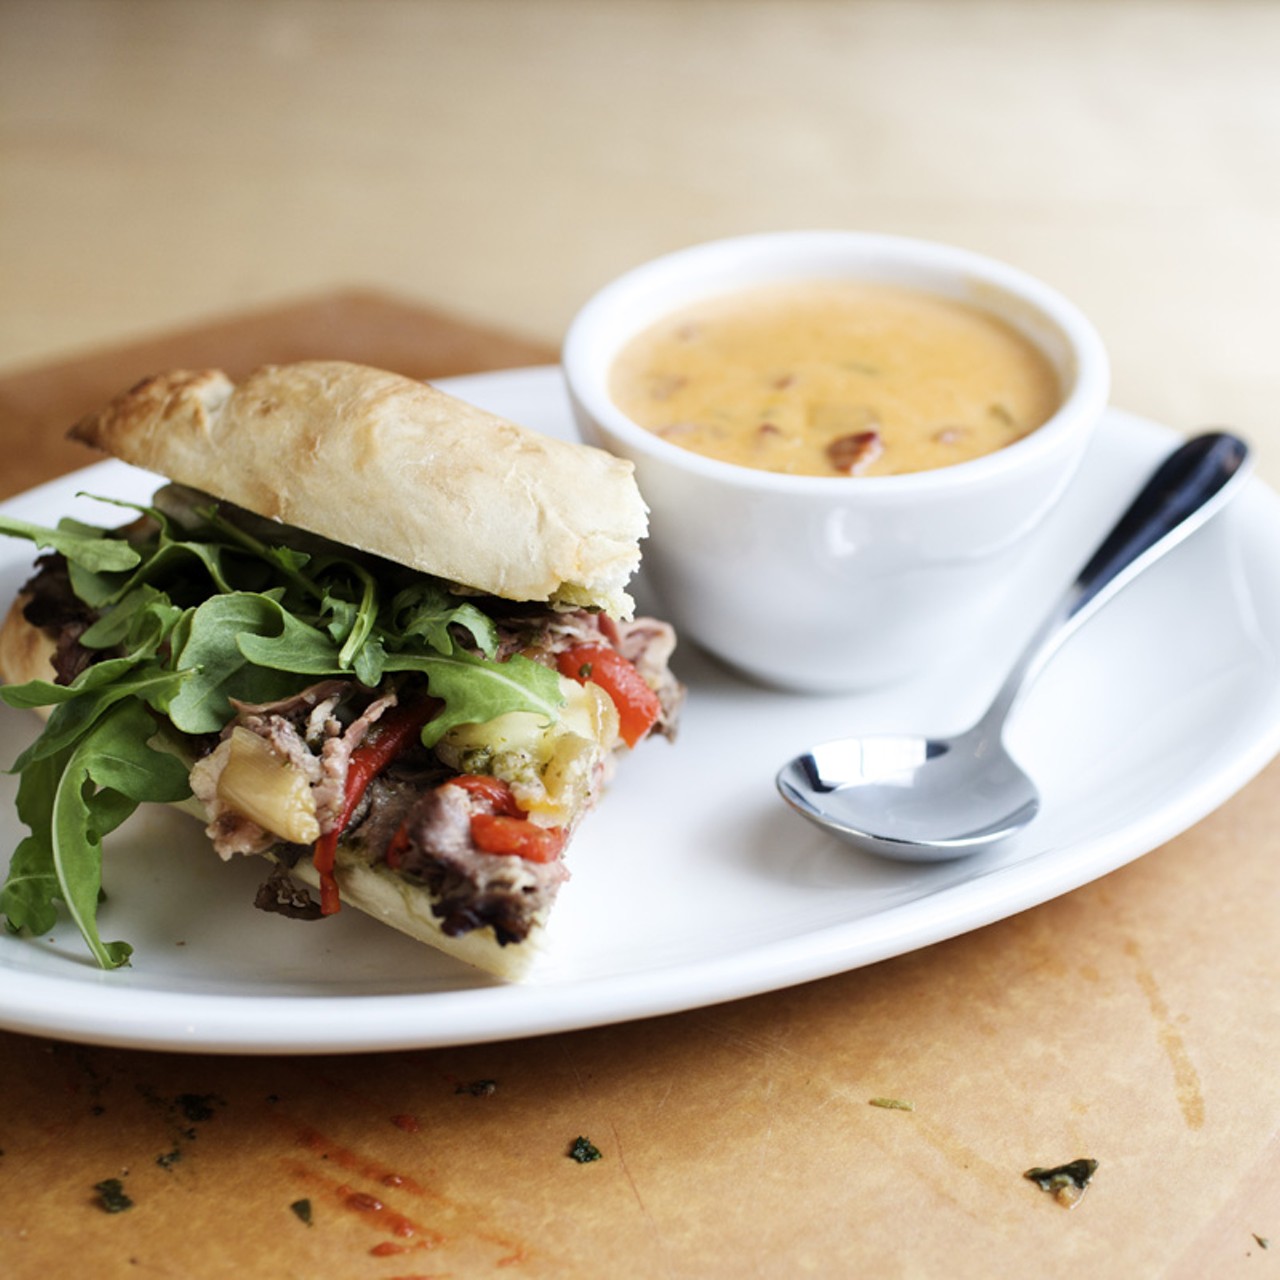 For a lunch special, you can order a half sandwich with a soup or salad. Shown here is a half "Brazilian" sandwich, which is sliced prime rib, arugula, roasted red pepper, caramelized onion, chimichurri and provolone. And the soup is the Corn & Chorizo Chowder.